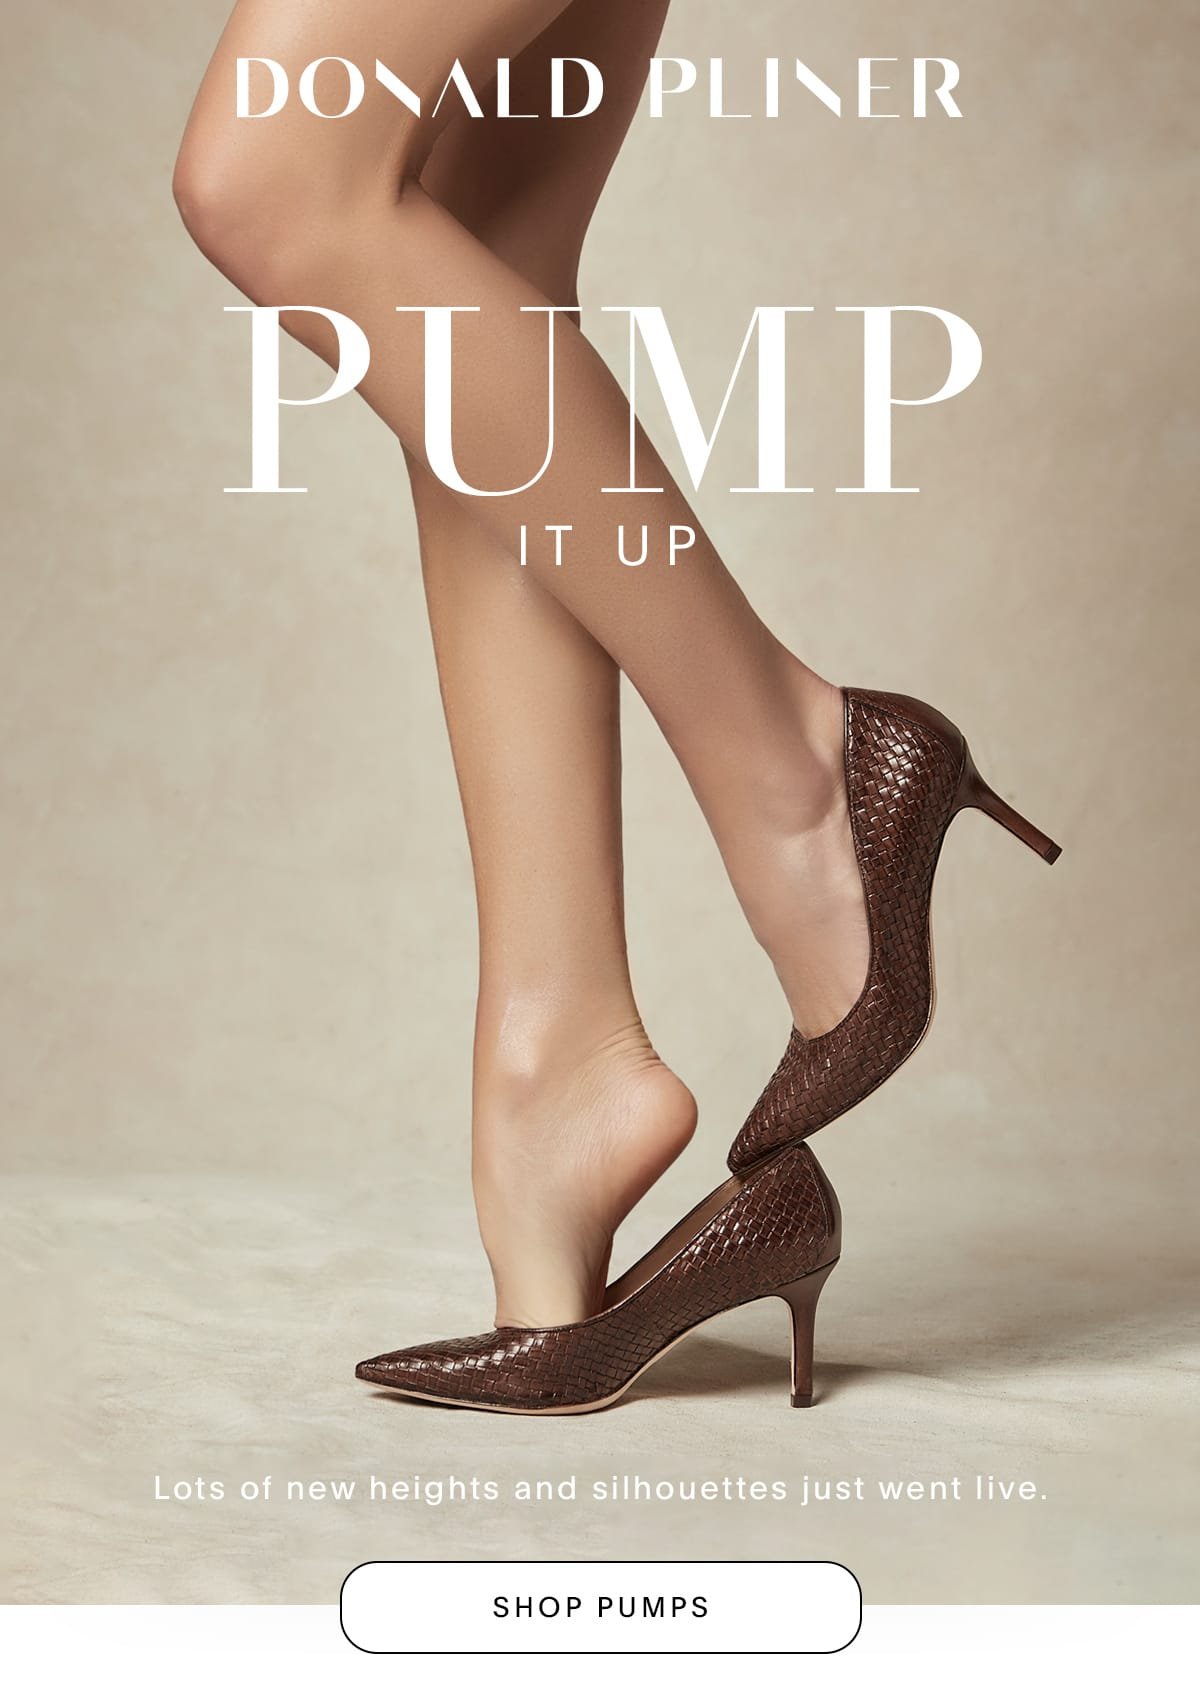 Donald Pliner. Pump It Up. Lots of new heights and silhouettes just went live. Shop Pumps